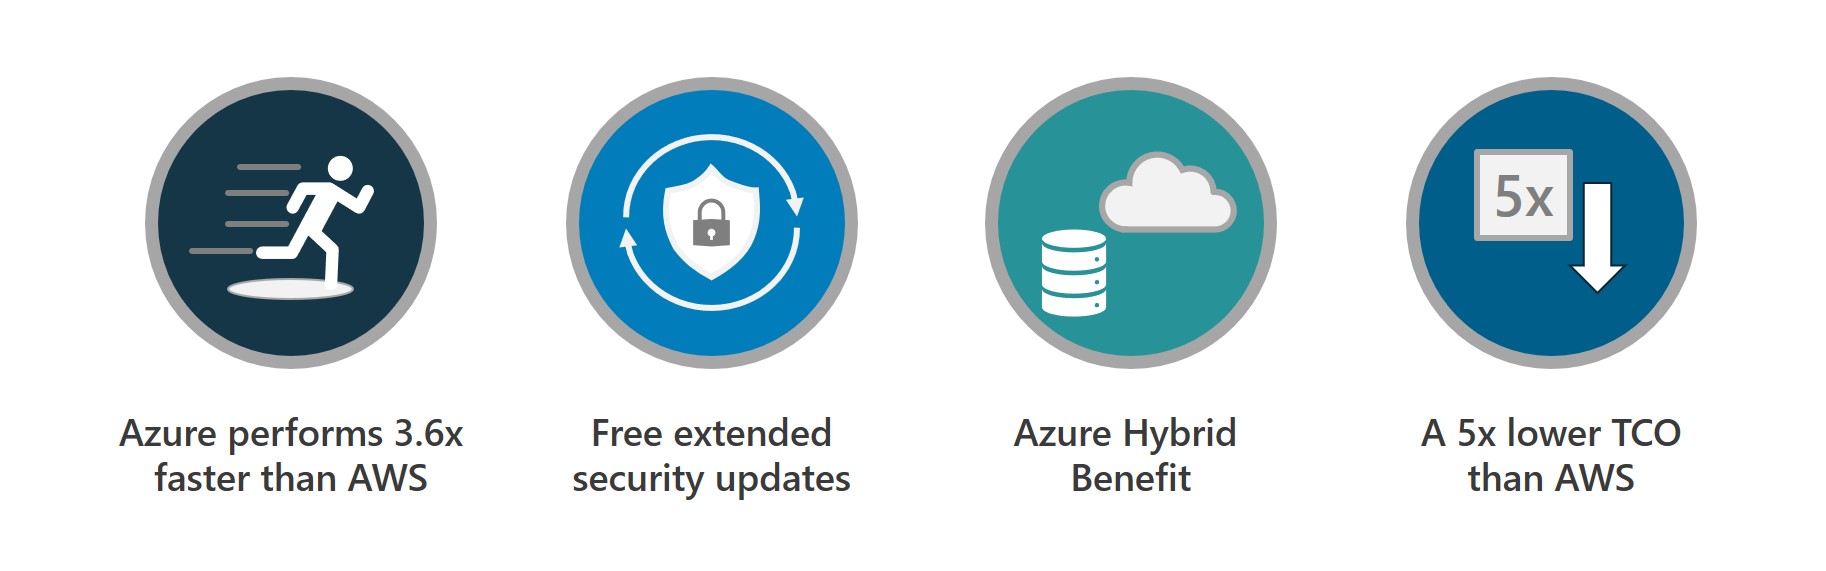 4 reasons why Azure is best for SQL server migration